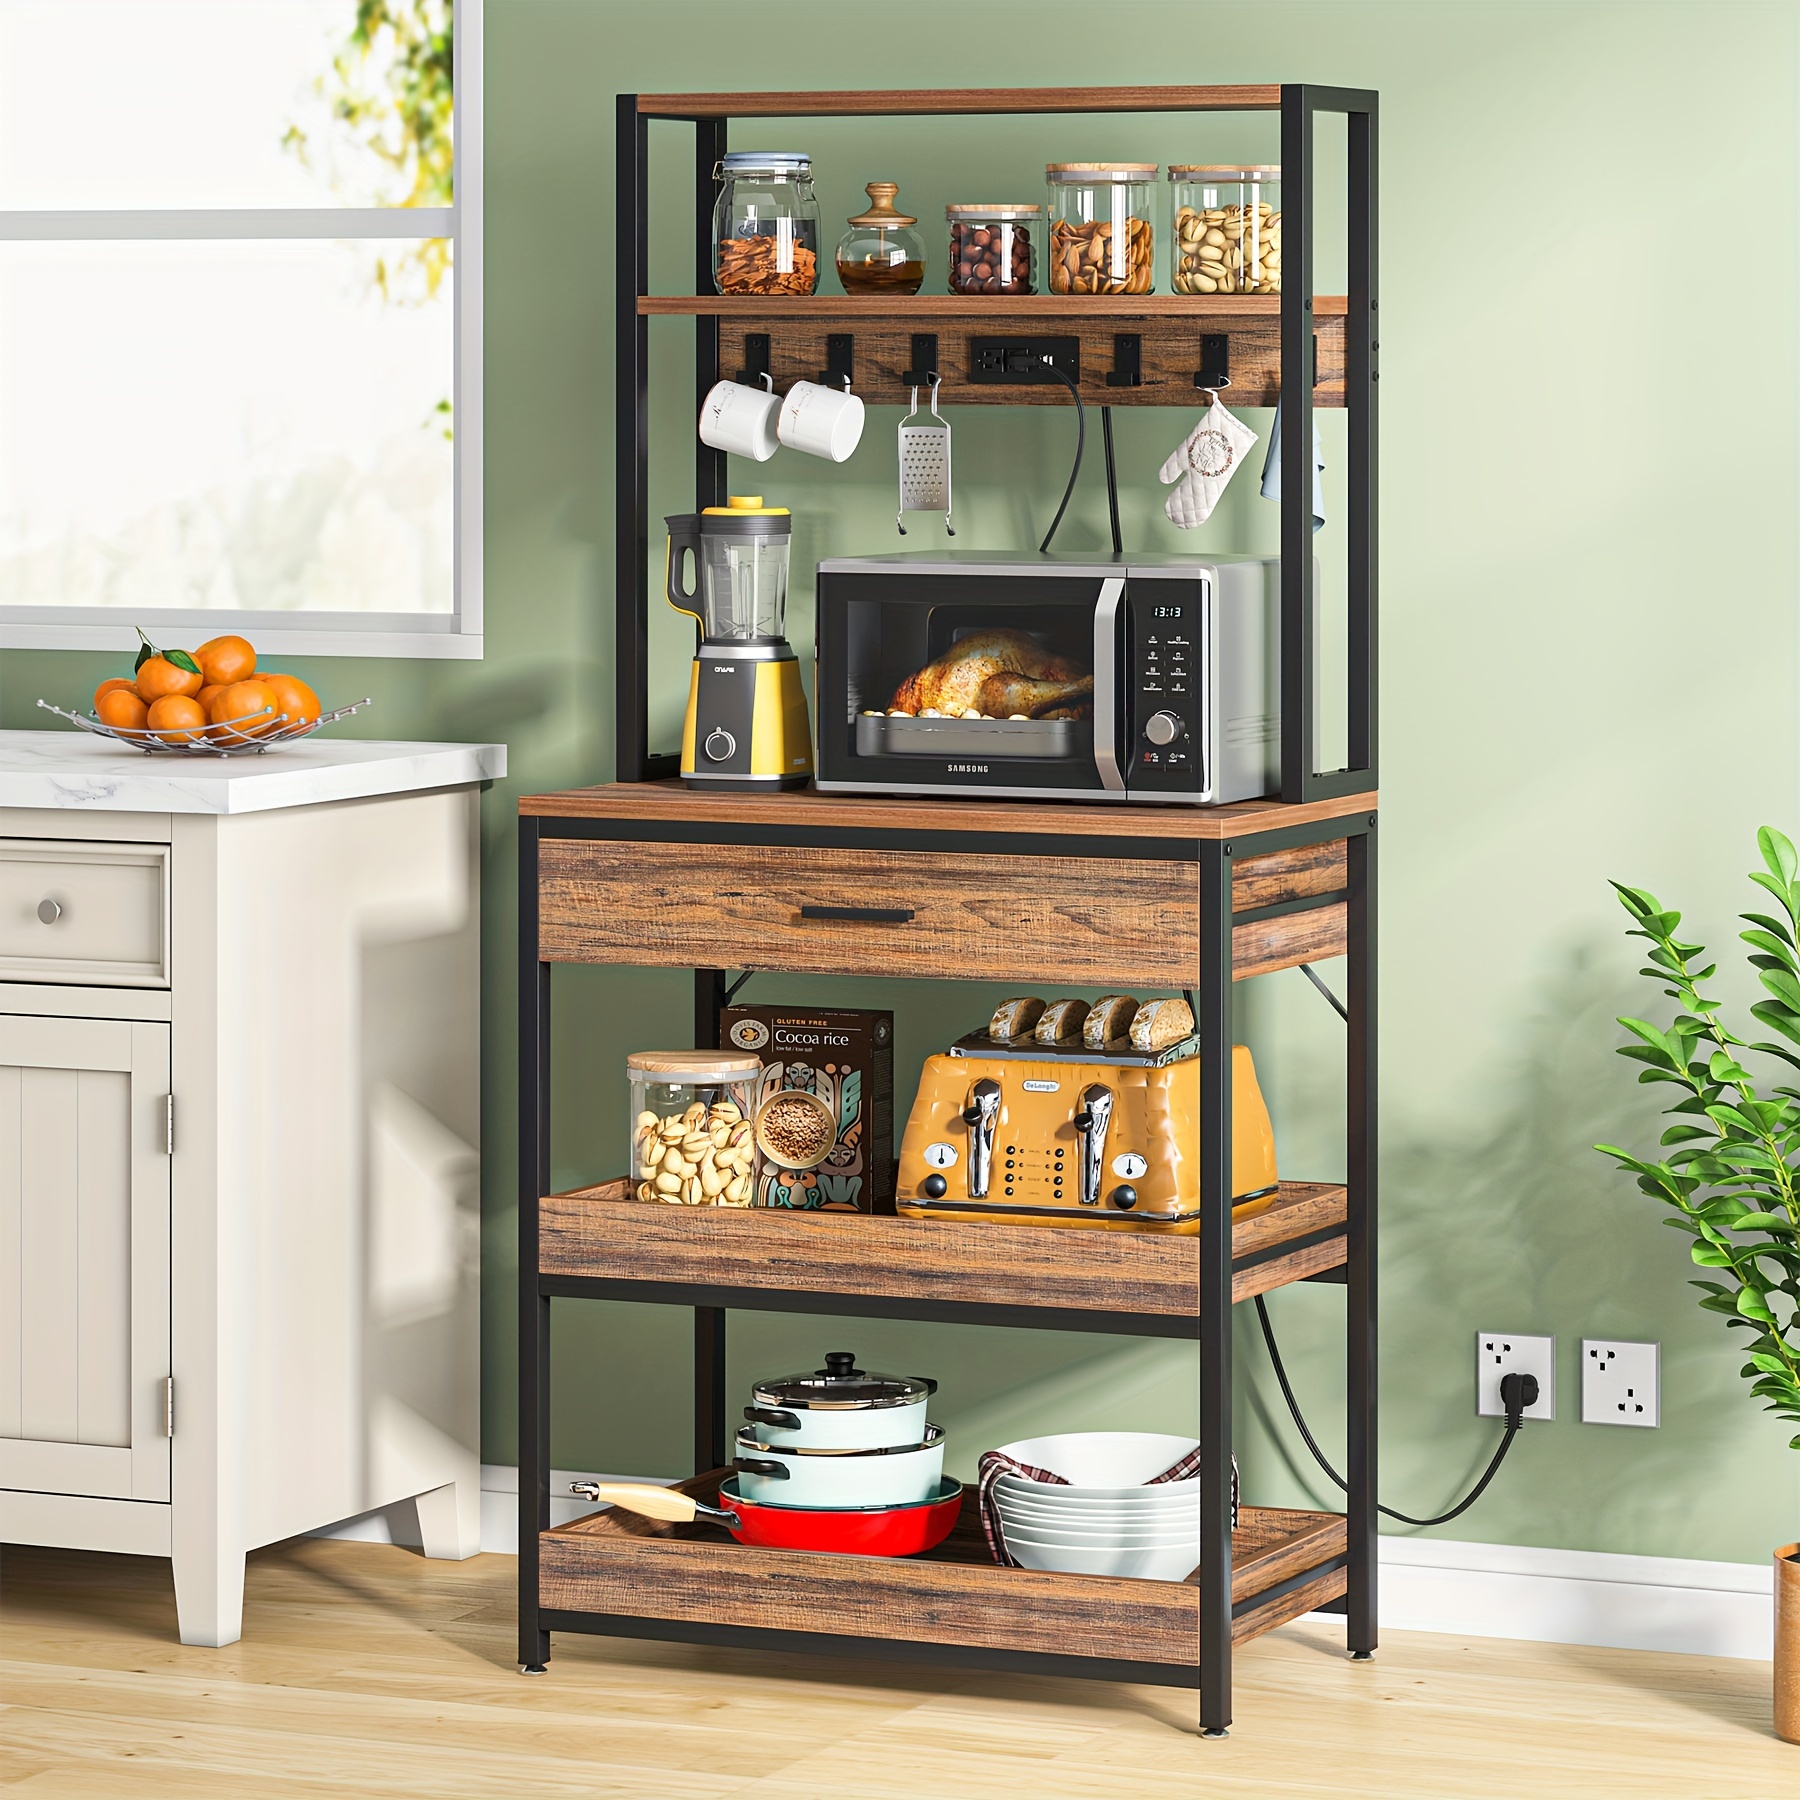 

Little Tree Kitchen Bakers Rac, 5-tier Microwave Oven Stand With Drawer And Sliding Shelves, Freestanding Coffee Bar, Kitchen Storage Shelf With 6 Hooks